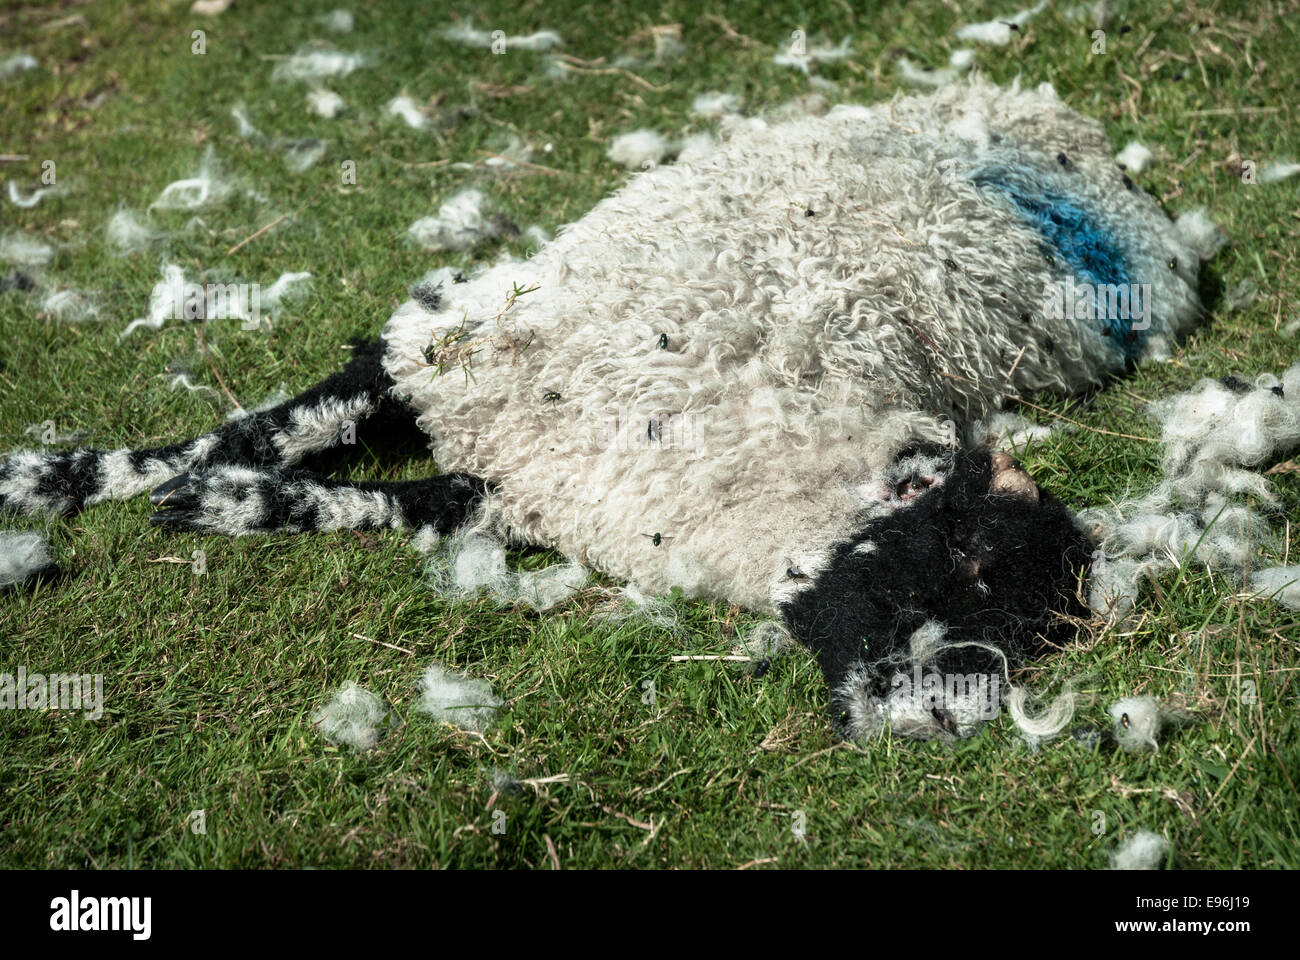 A dead sheep covered in flies. Stock Photo